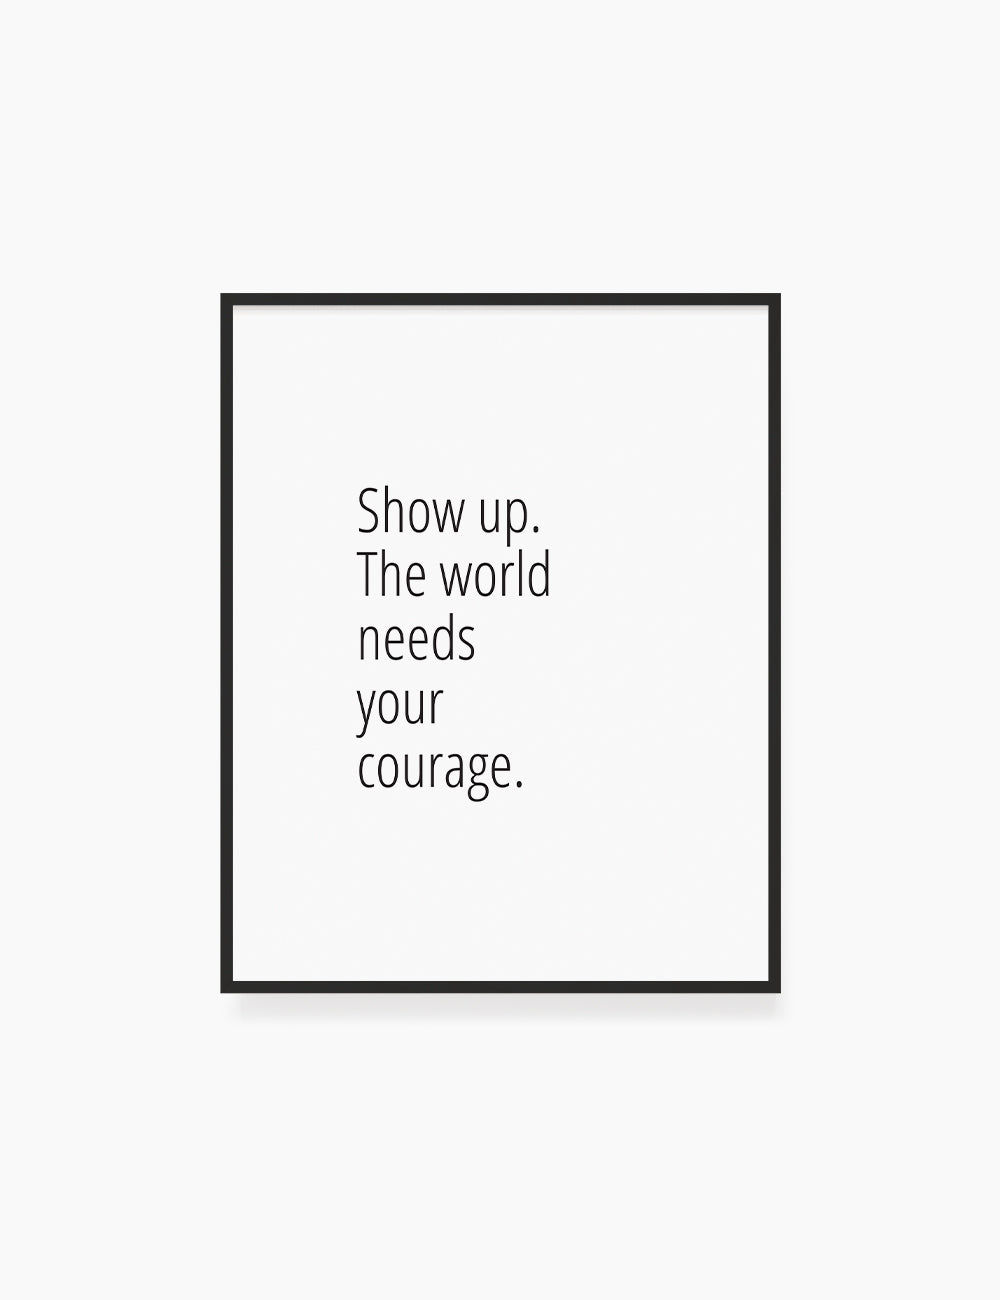 Printable Wall Art Quote: SHOW UP. THE WORLD NEEDS YOUR COURAGE. Motivational Quote. WA031 - Paper Moon Art & Design